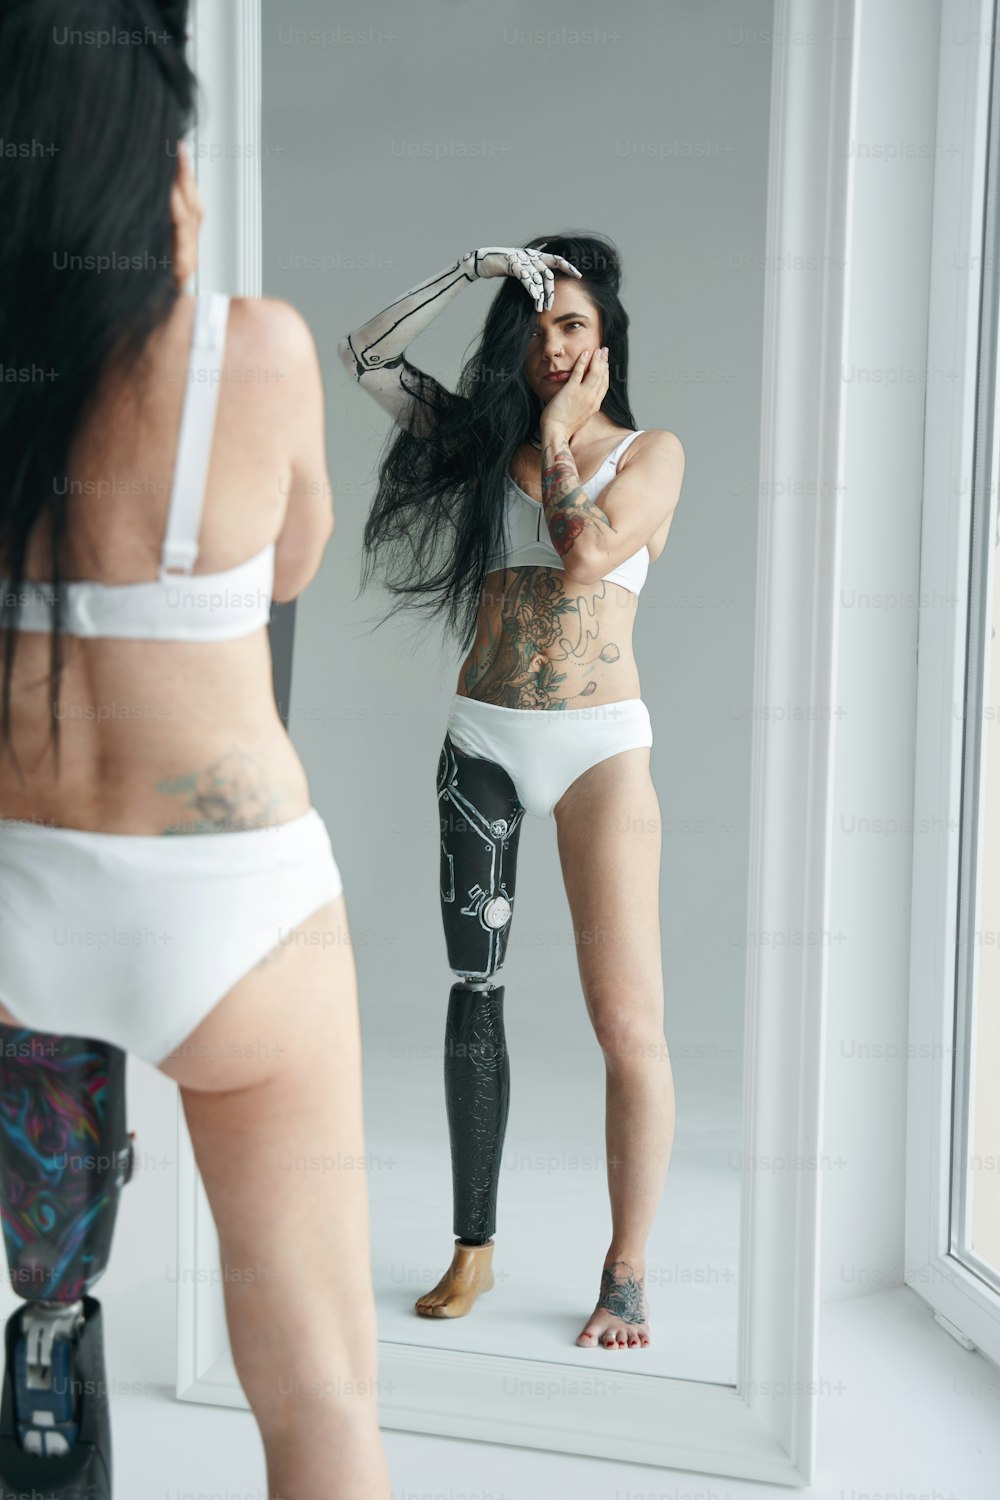 Brunette woman with unusual appearance and futuristic droid body art. Girl standing in front of the mirror and looking at her reflection. Studio photography